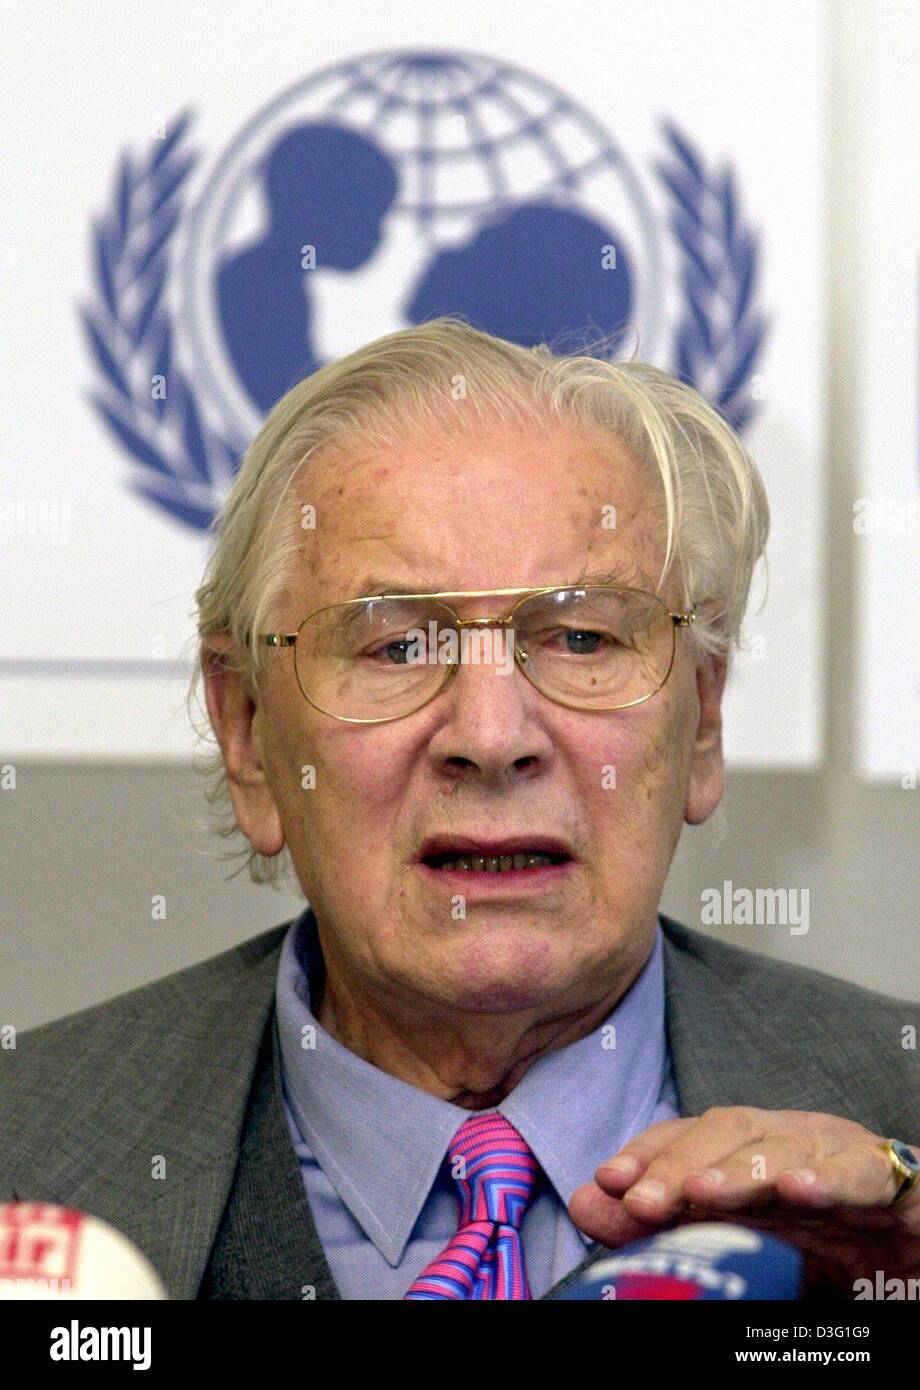 (dpa) - The UNICEF ambassador and British actor Sir Peter Ustinov pictured during a press conference in Hamburg, 21 March 2003. He harshly criticised his governments for the attack on Iraq. UNICEF appealed to the warring parties in Iraq to show restraint and not to attack or destroy important civilian objects, such as water supplying installations, hospitals and living quarters, an Stock Photo